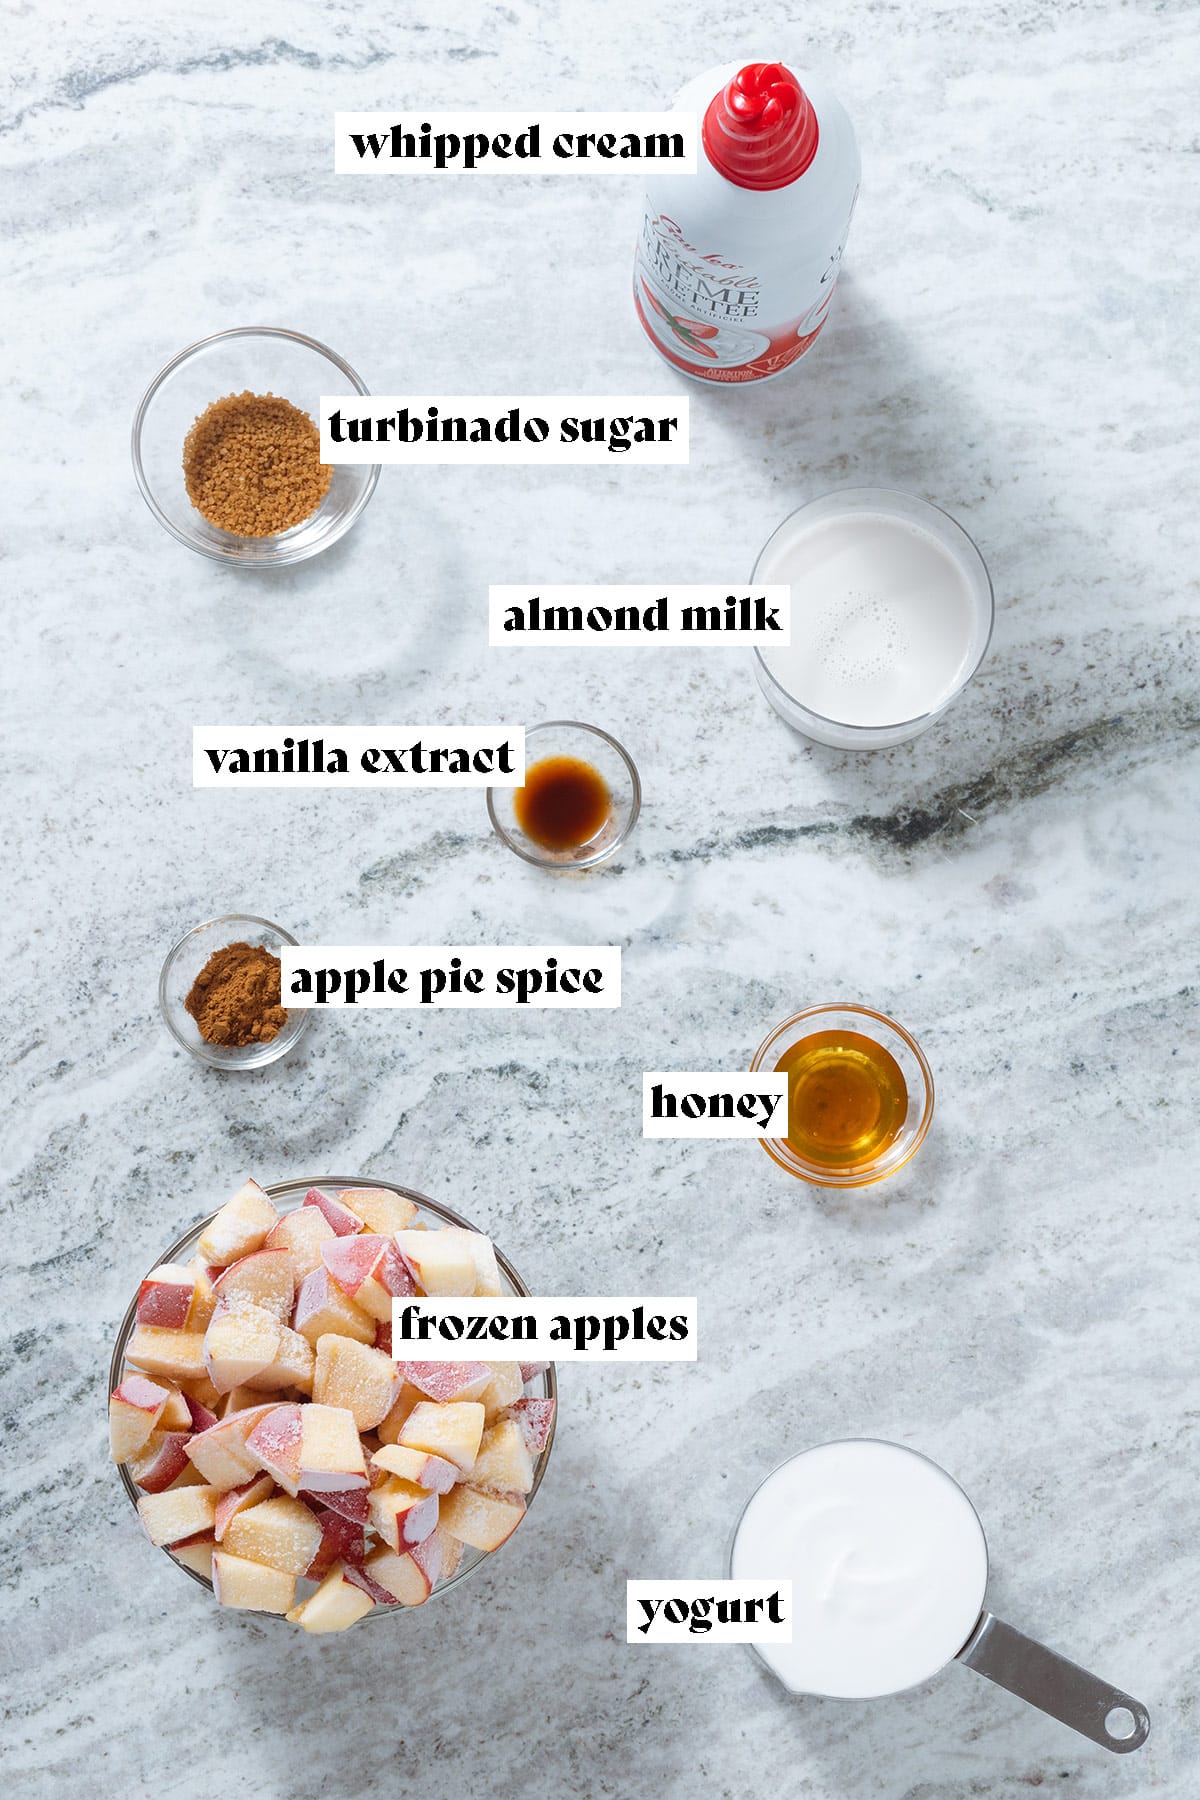 Frozen apples, yogurt, milk, spices, and other ingredients laid out on a grey stone background with text overlay.